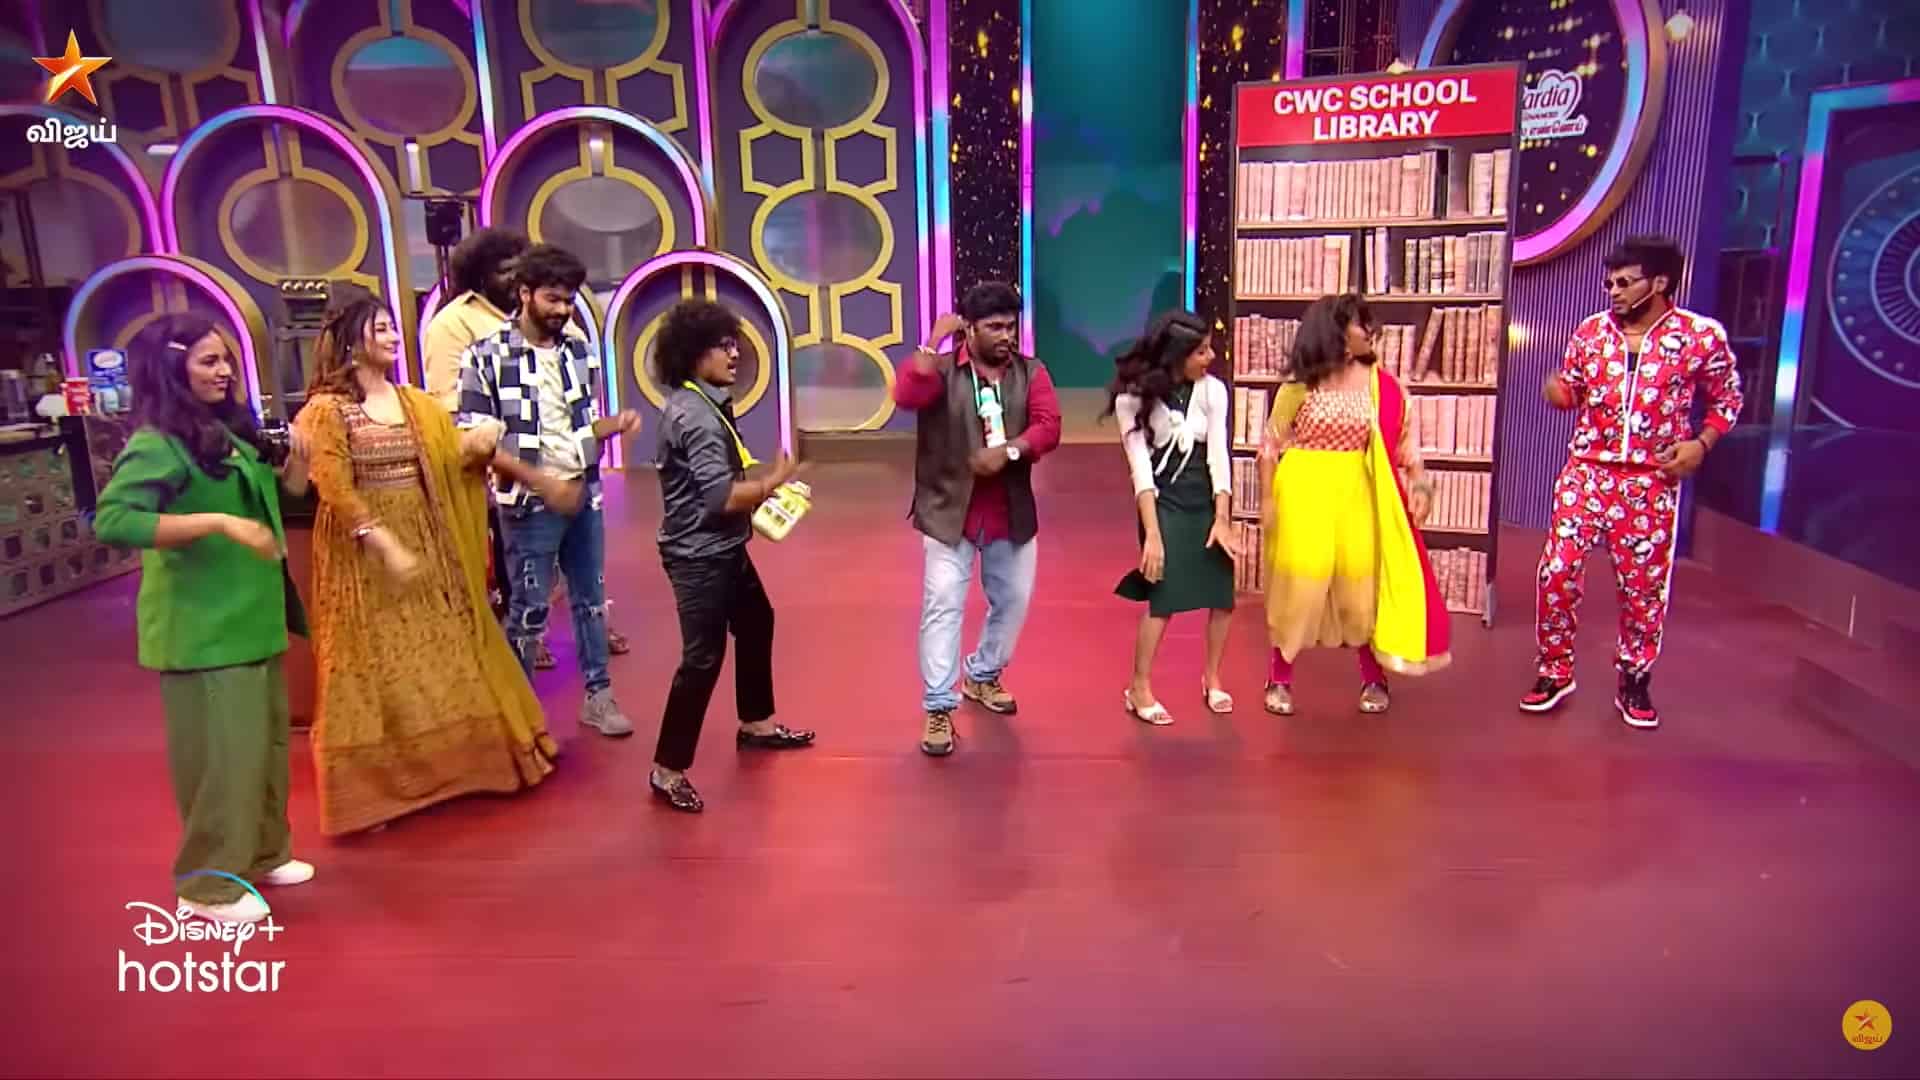 Contestants of the show